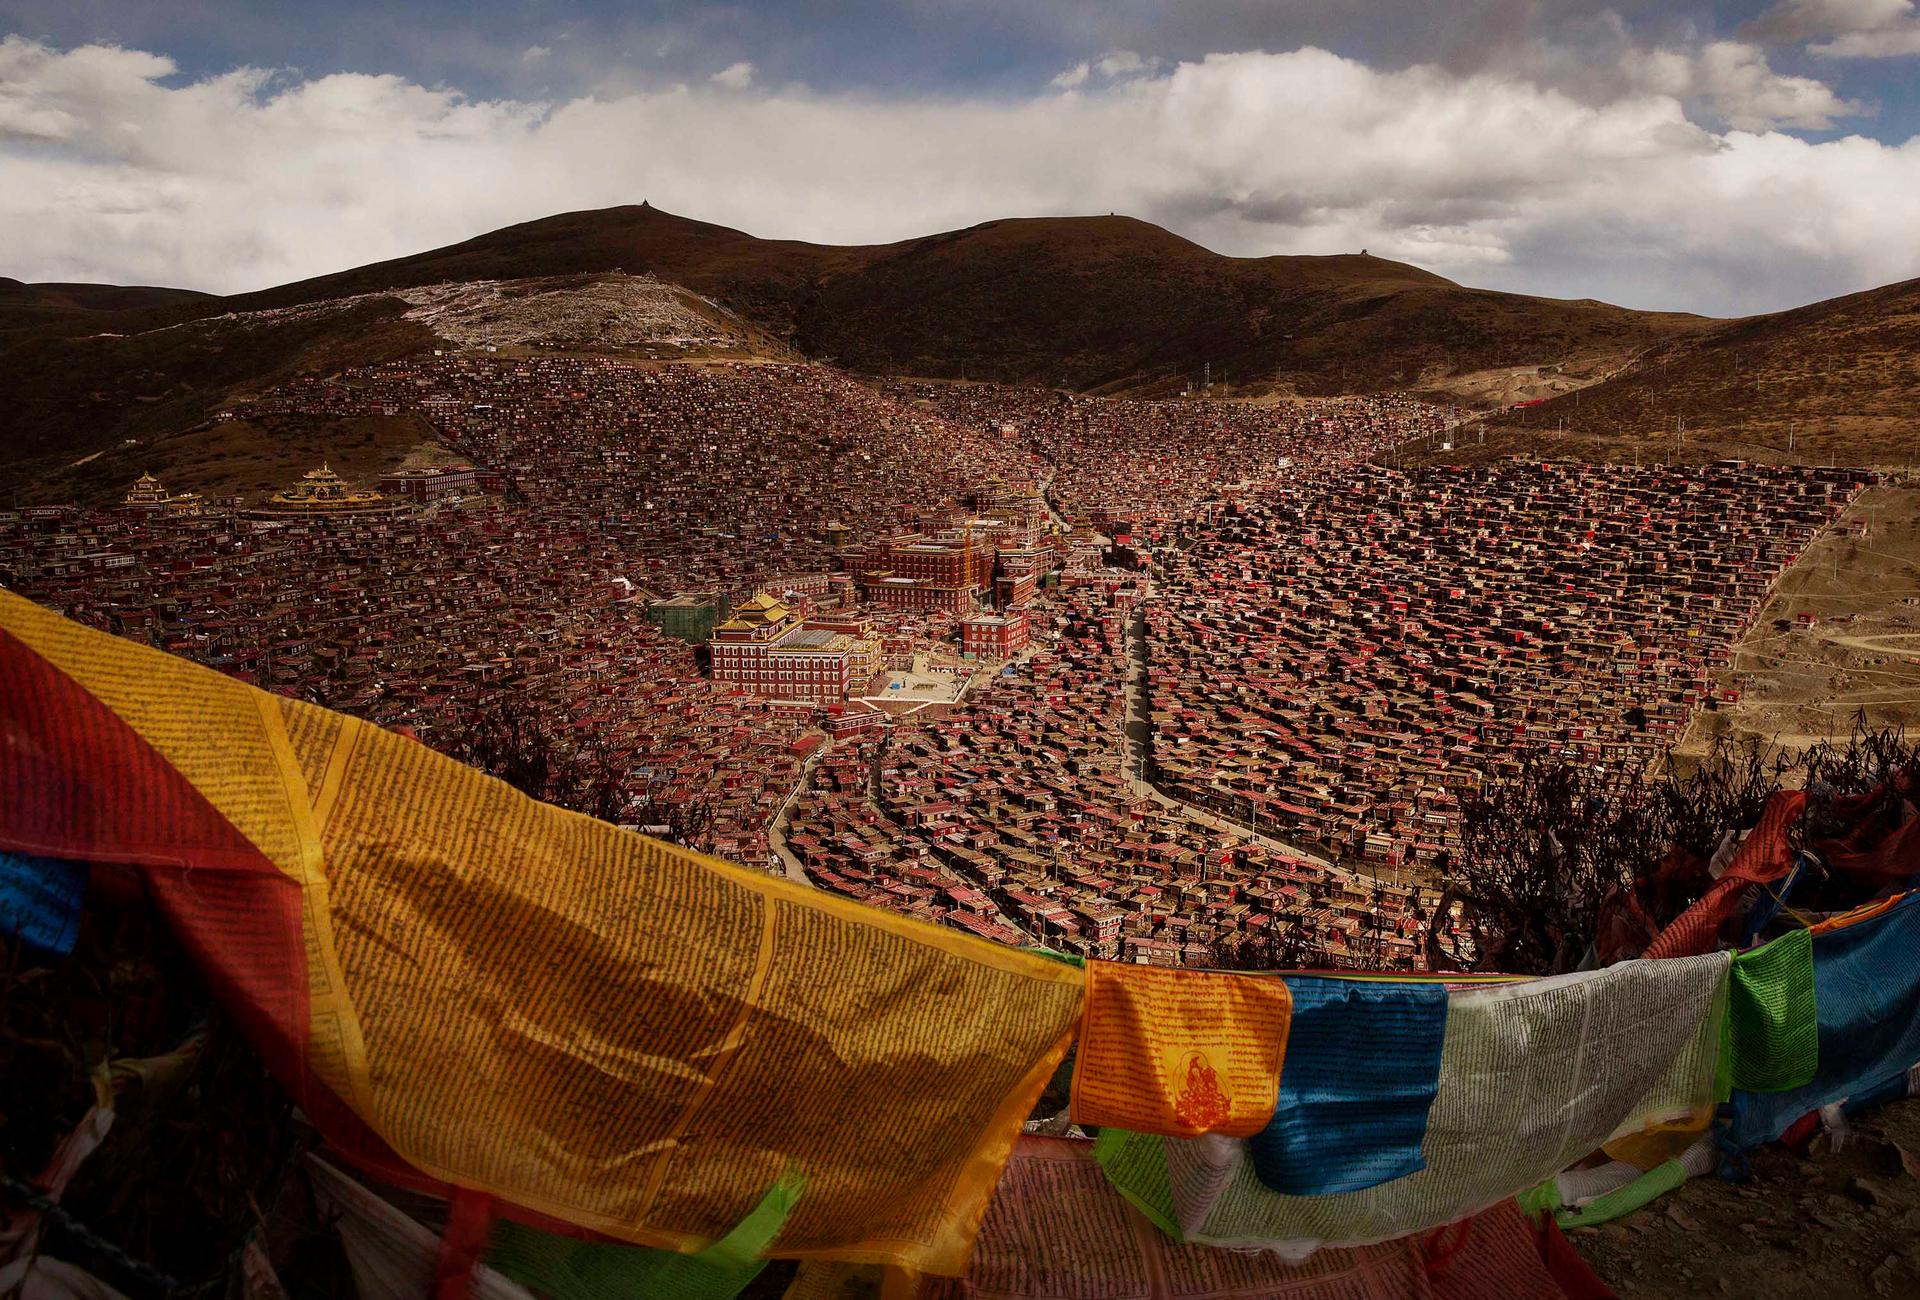 Tibetan prayer flags, known as Lung-ta, on a hillside in the Larung Valley of Sertar County, Garze Tibetan Autonomous Prefecture, Sichuan province, China, 30 October 2015.